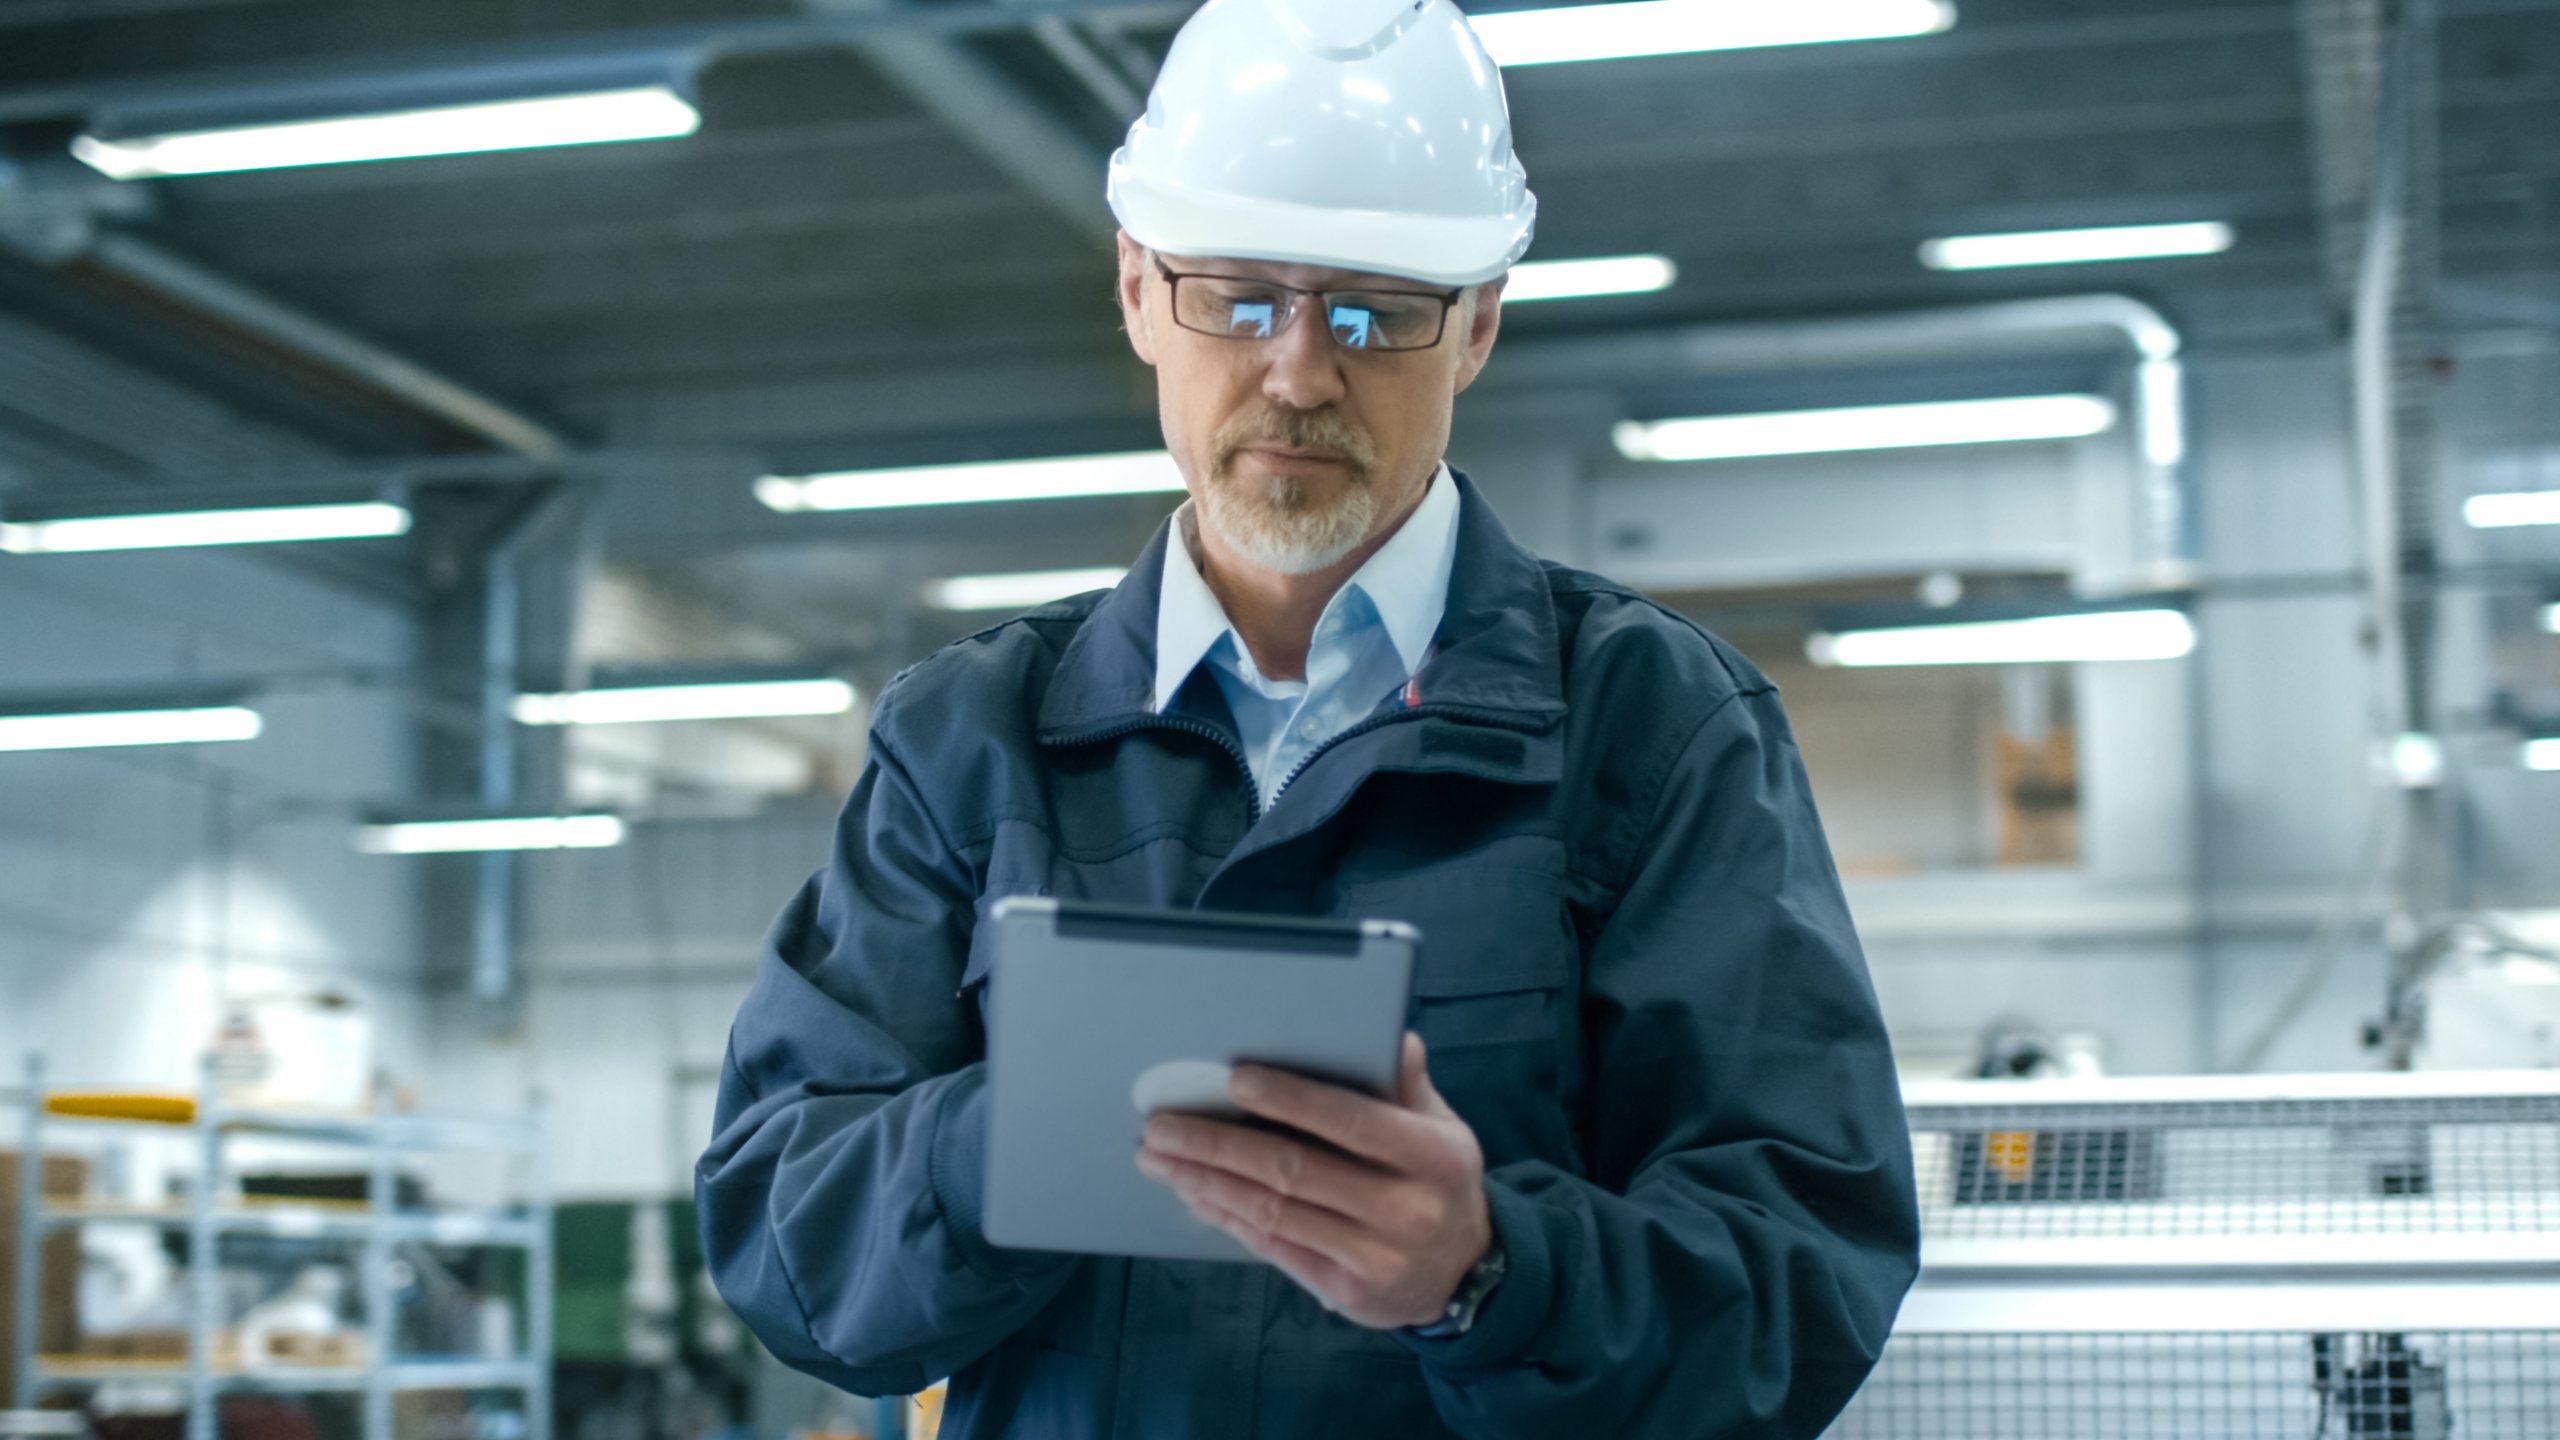 Man on factory floor with tablet